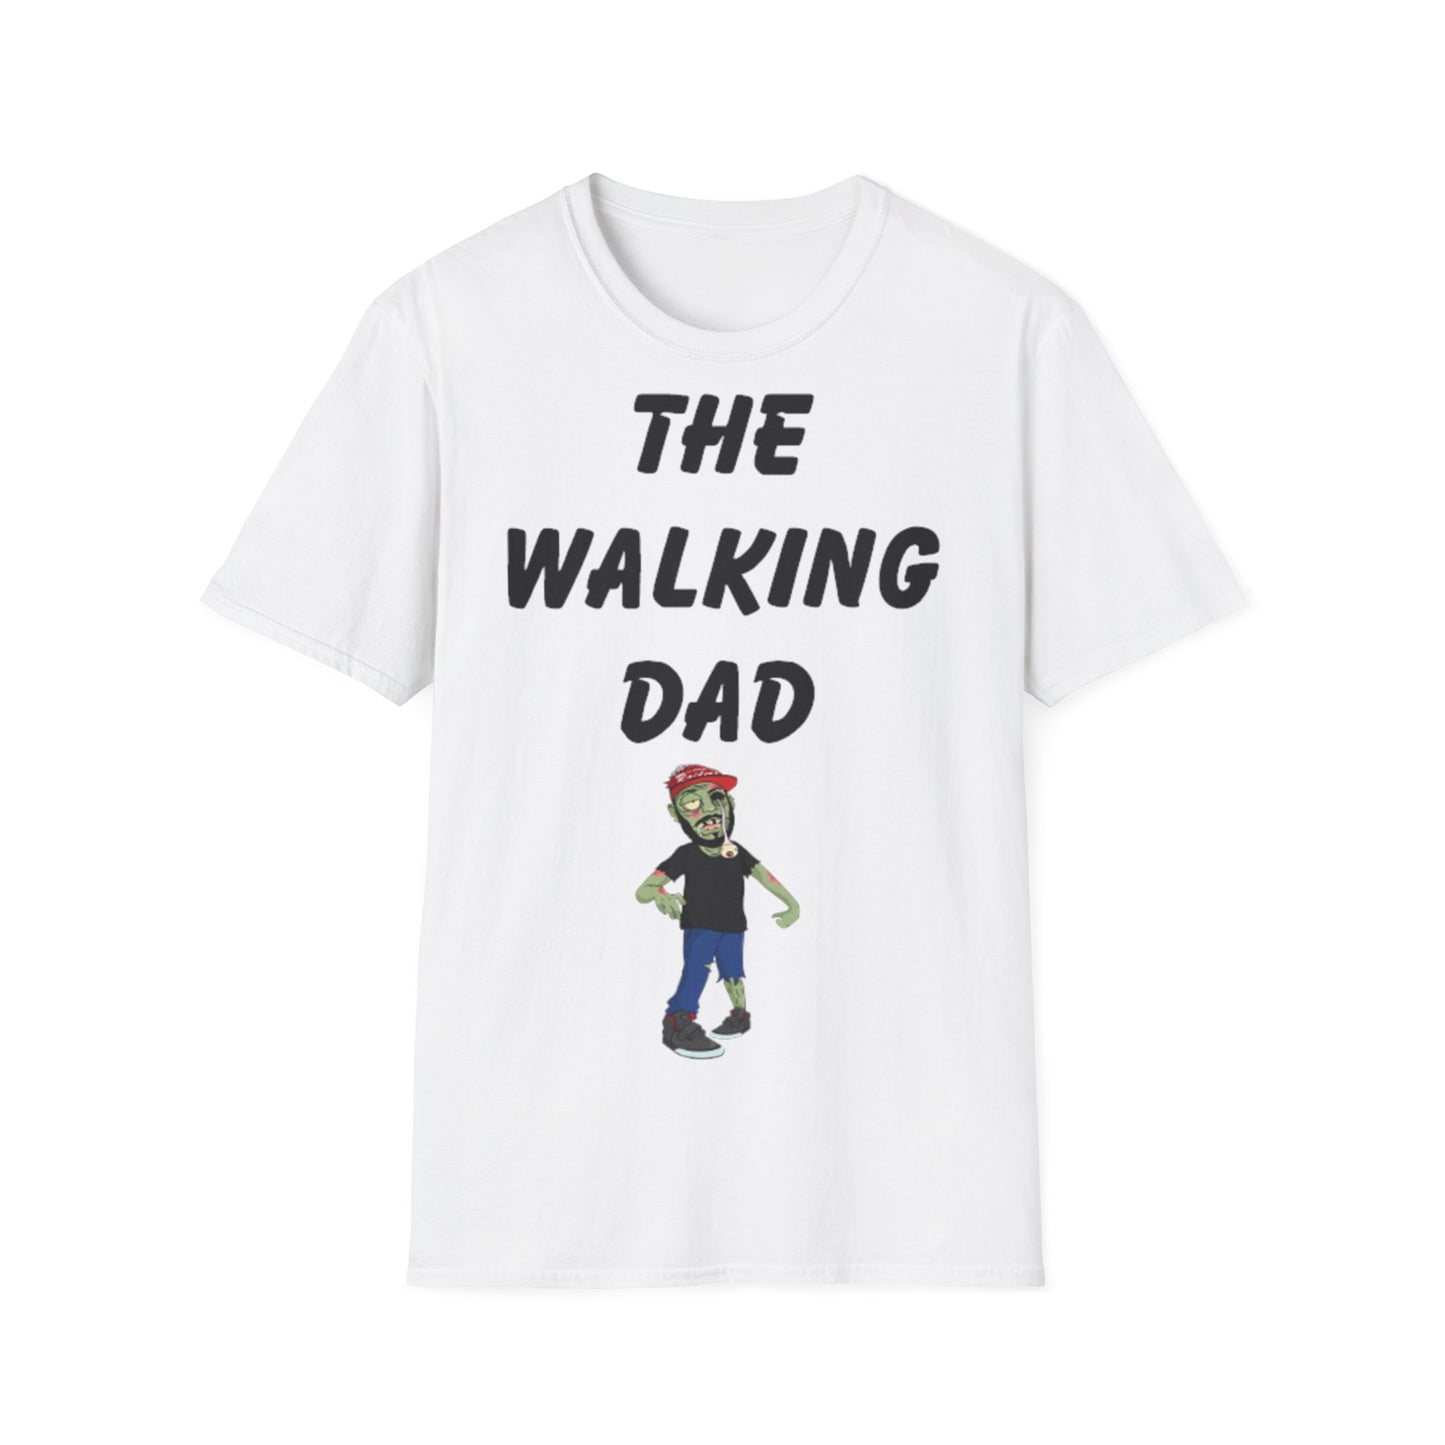 A white t-shirt with a funny quote: The Walking Dad and a zombie